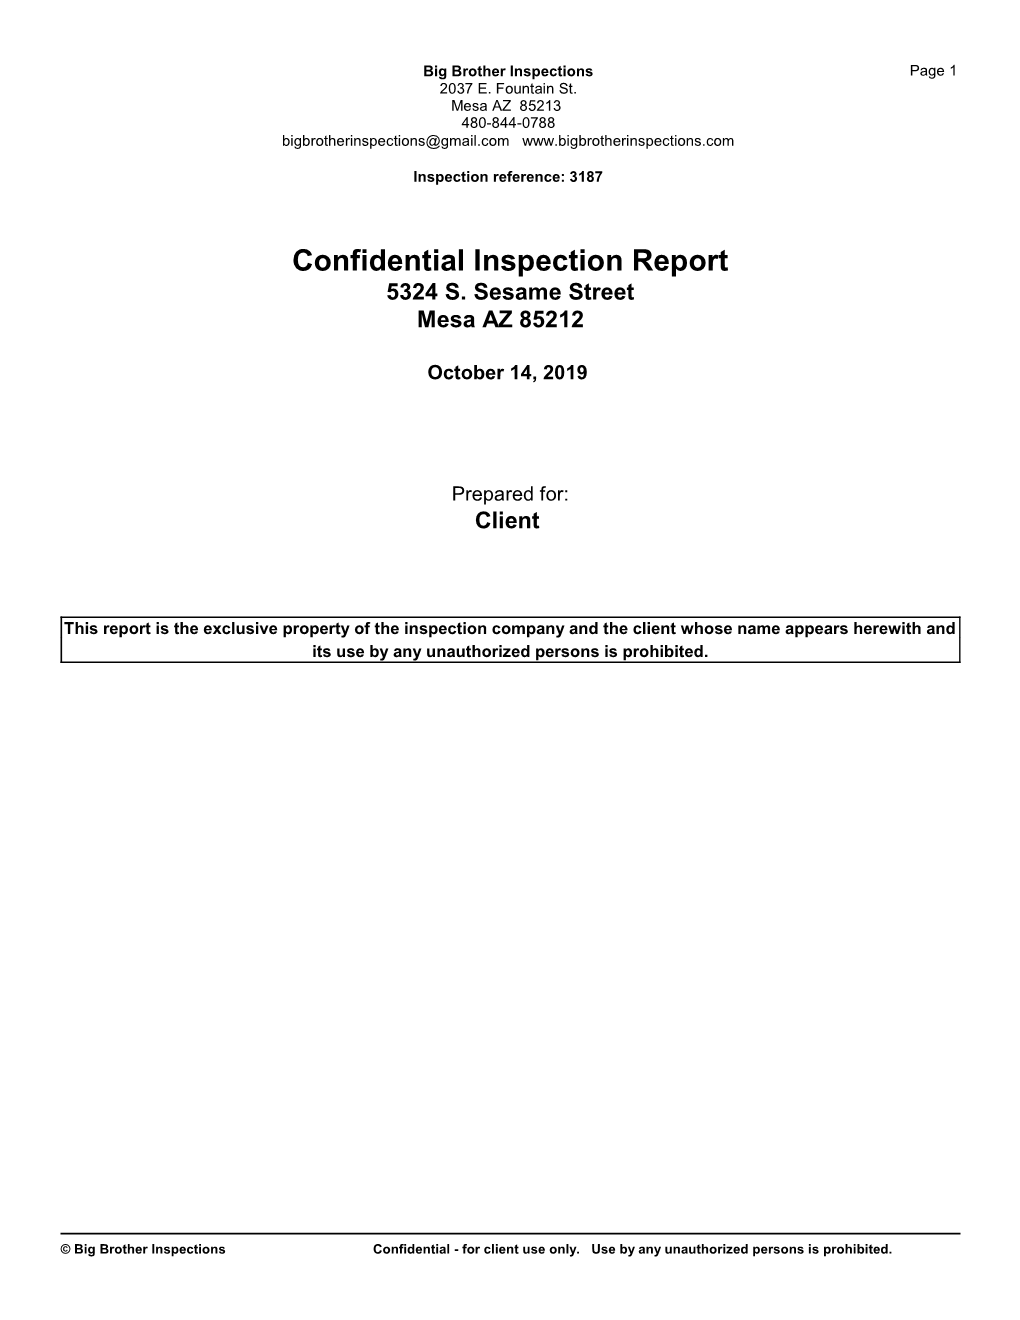 Confidential Inspection Report 5324 S